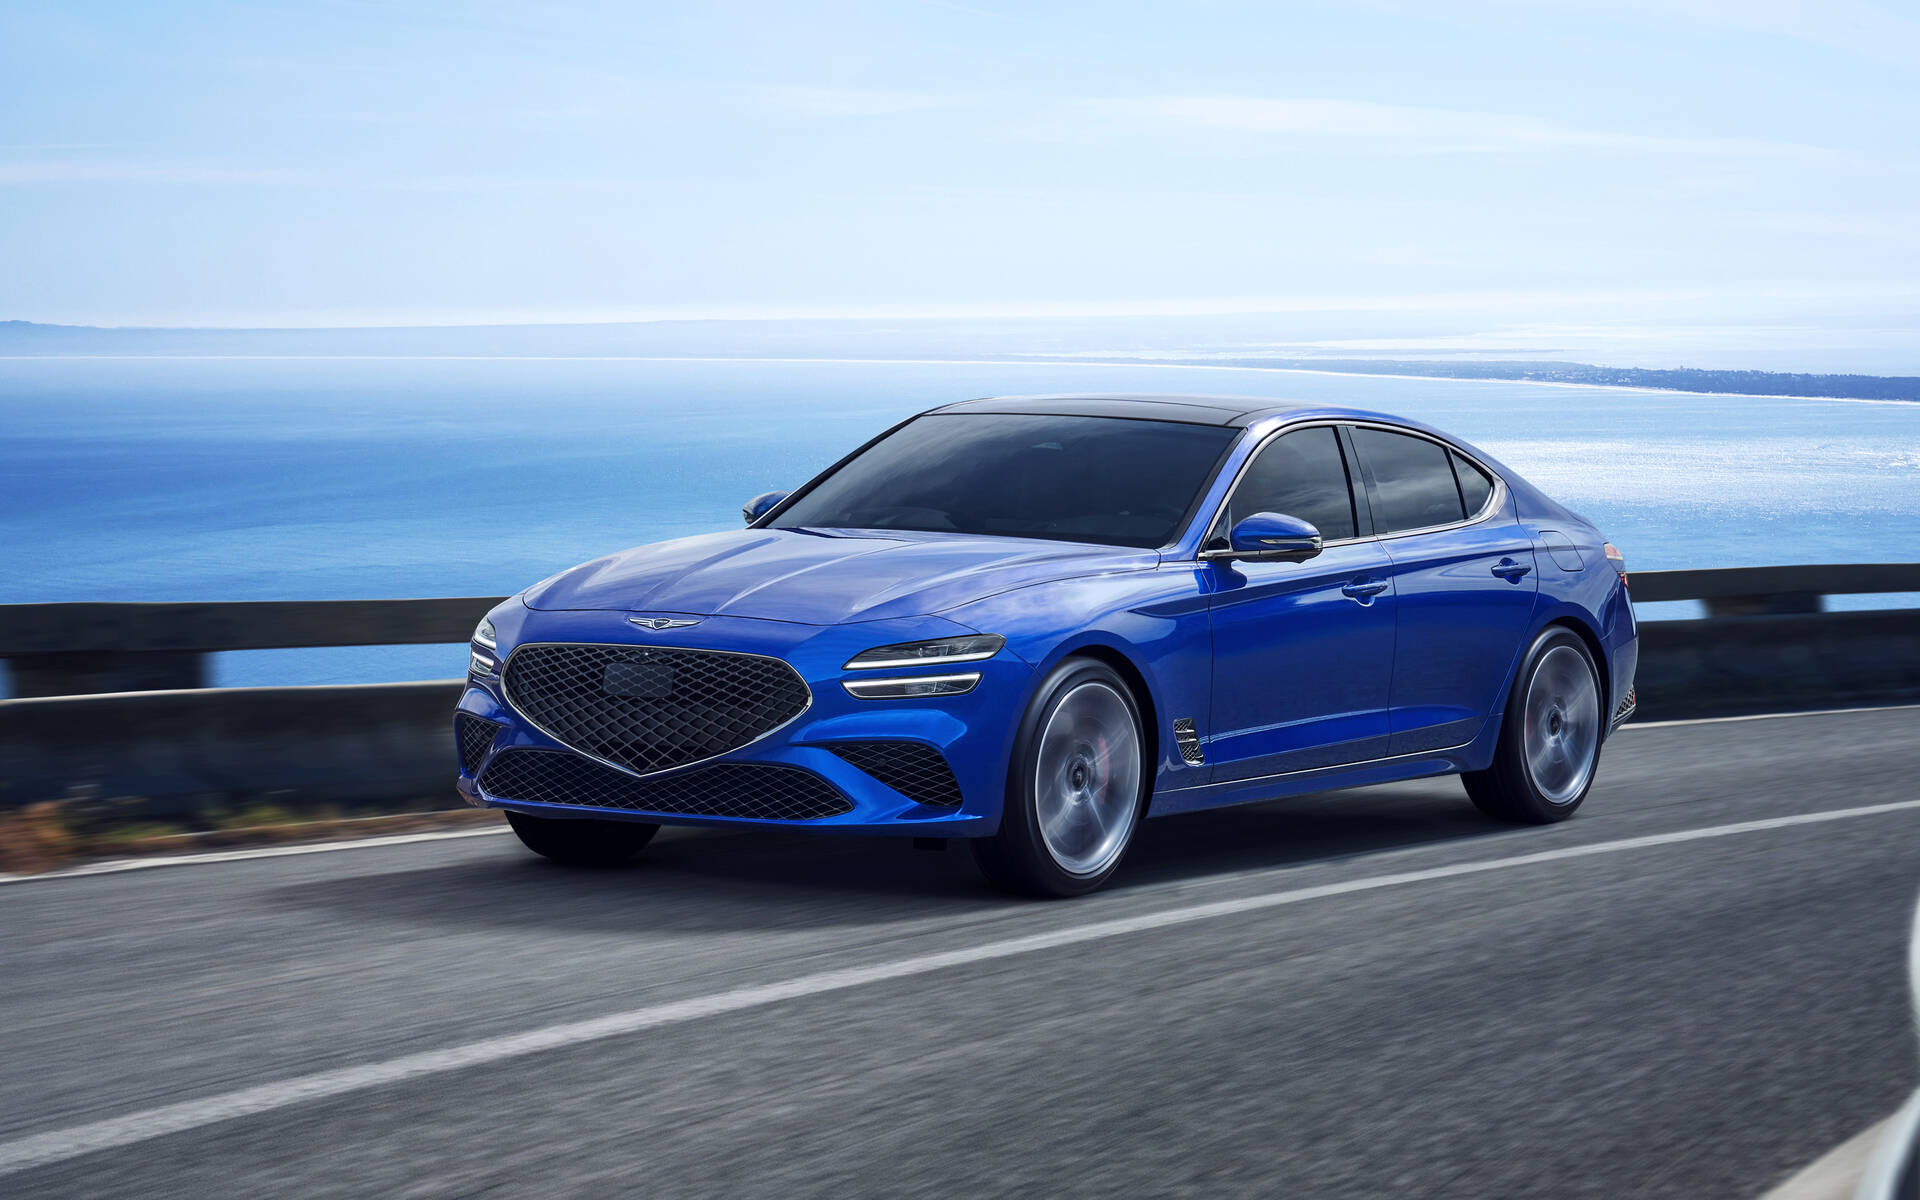 Front-angled view of a blue Genesis G70 sedan